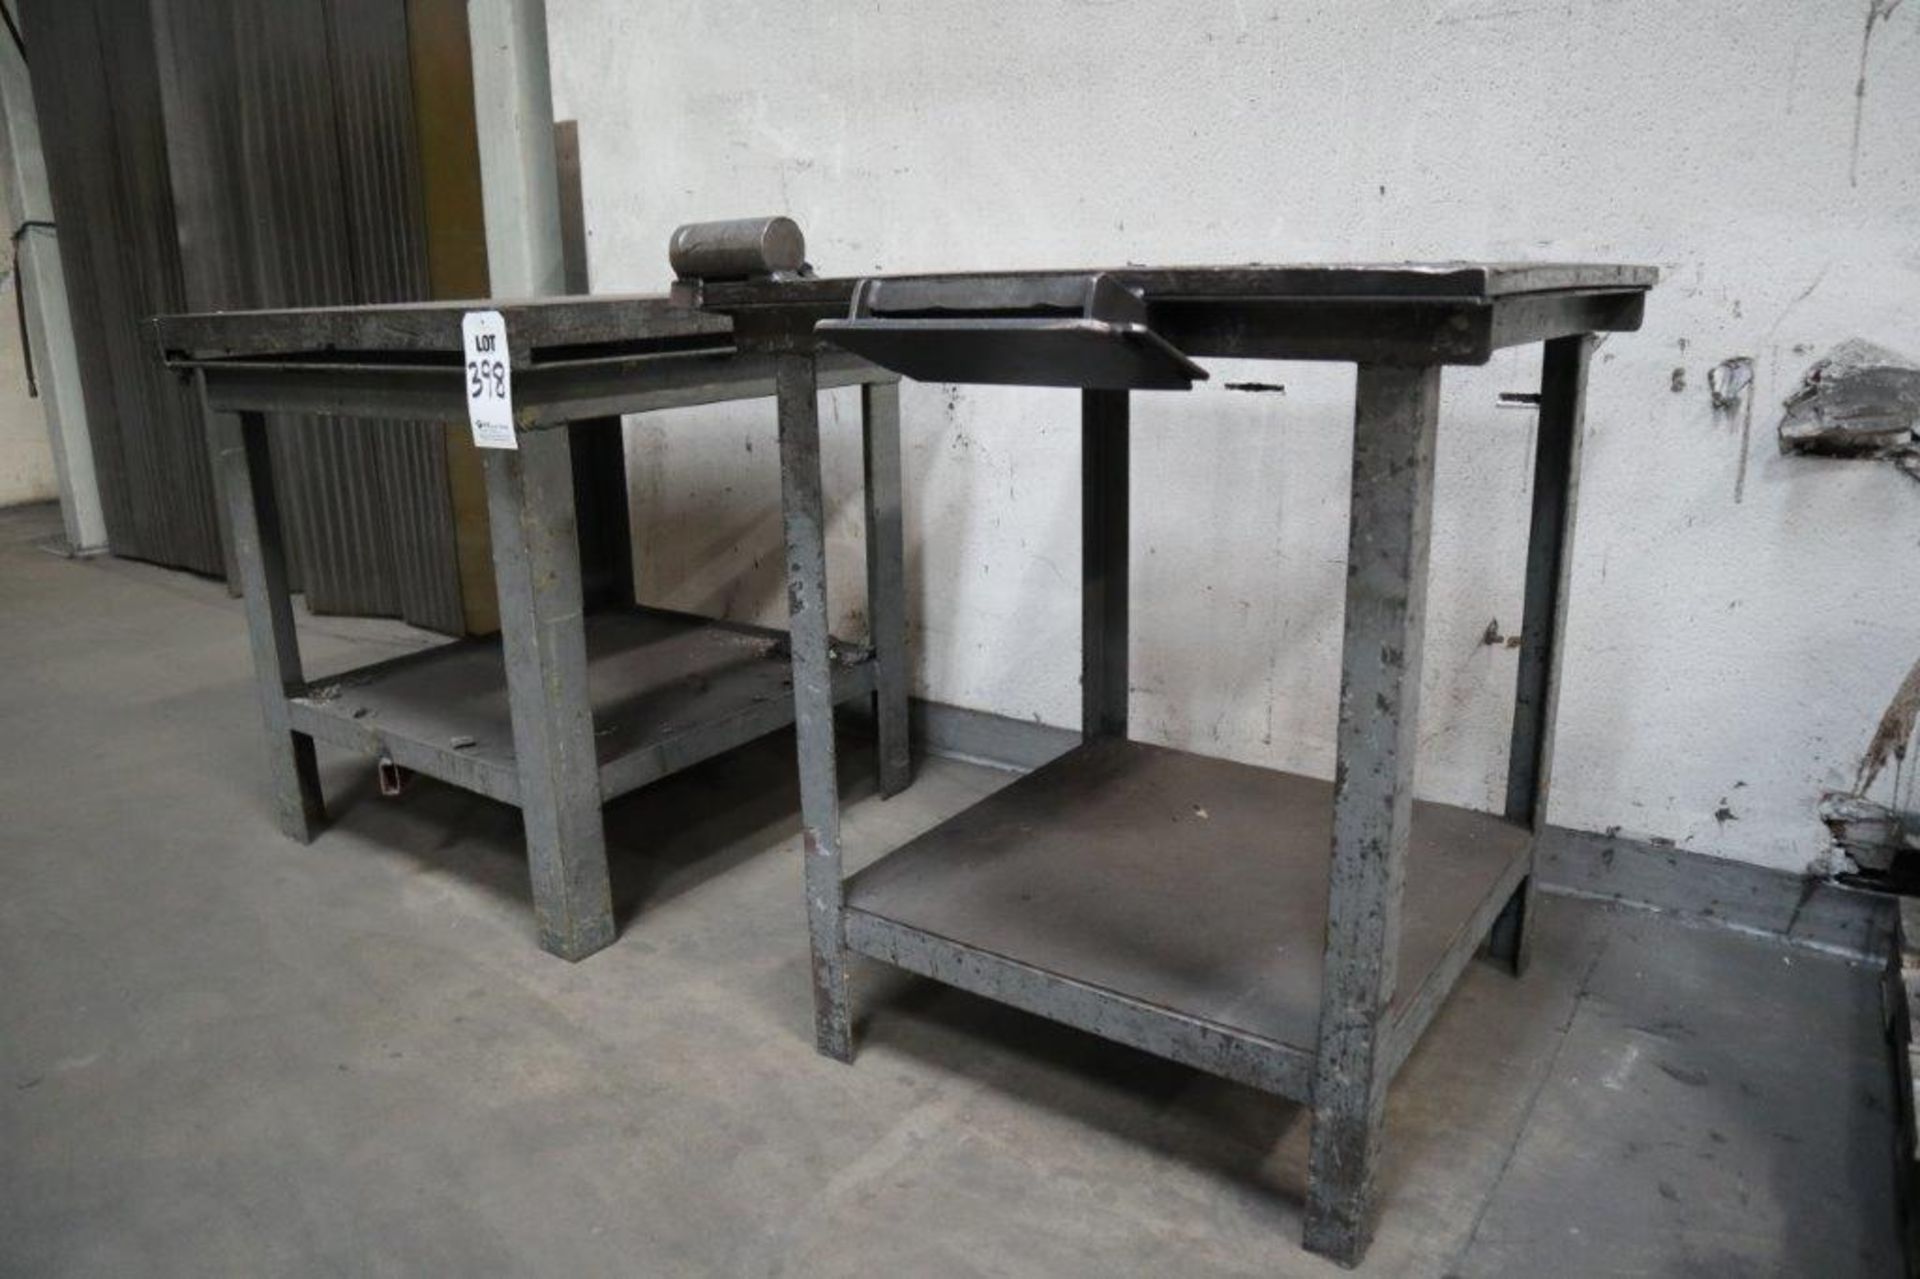 LOT TO INCLUDE: (1) STEEL SHOP TABLE 34" X 34", (1) STEEL SHOP TABLE 30" X 30"